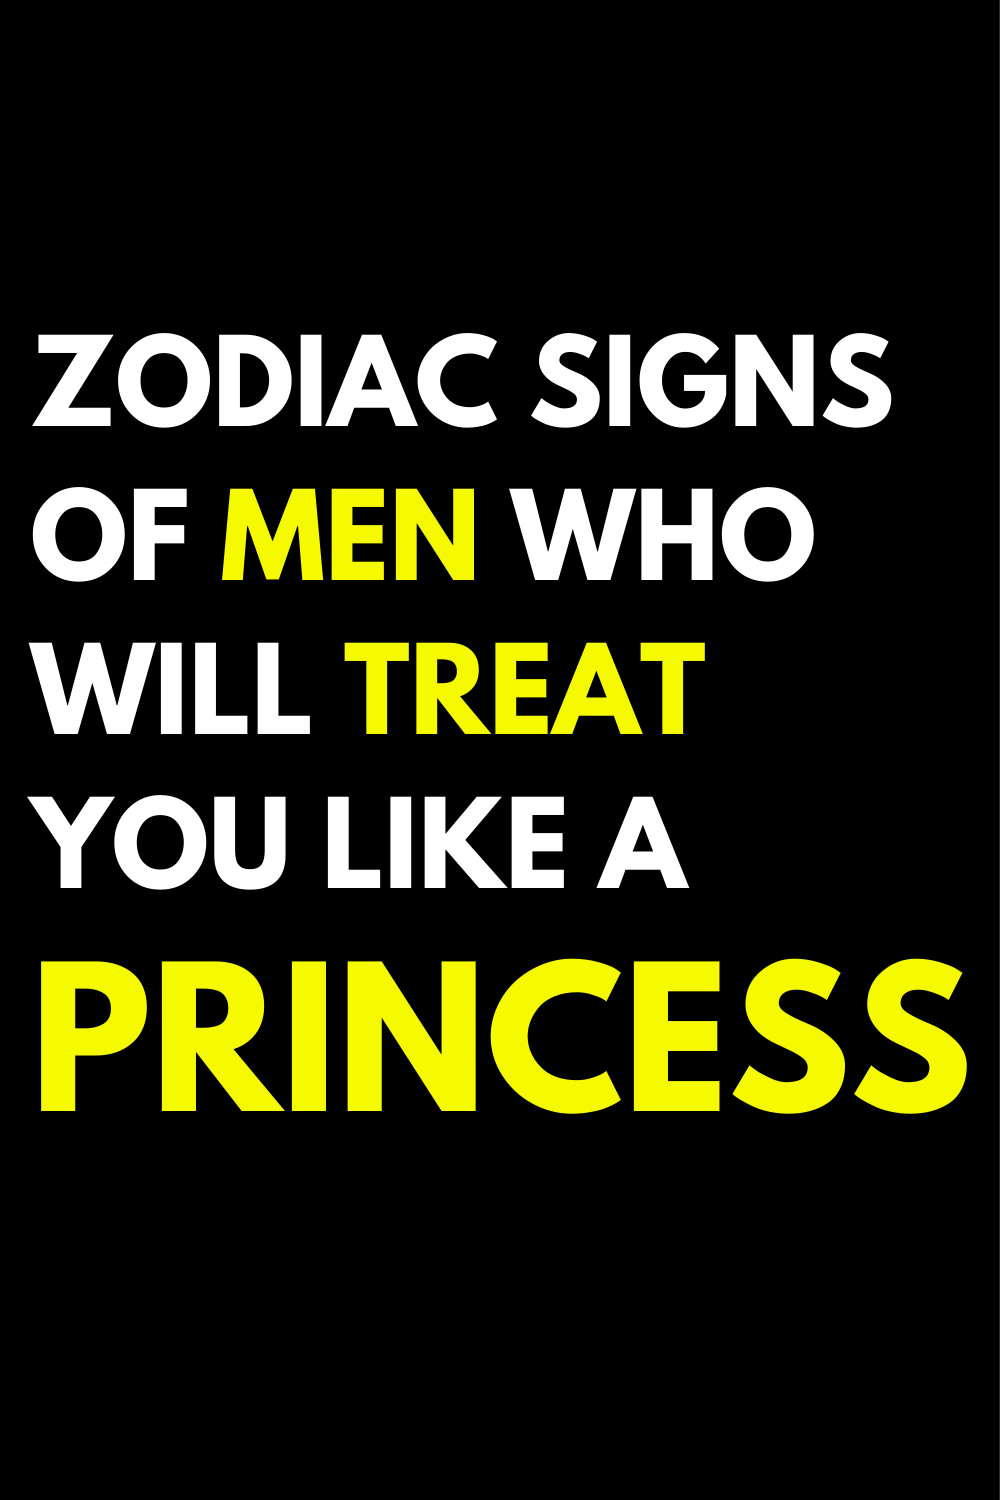 Zodiac signs of men who will treat you like a princess